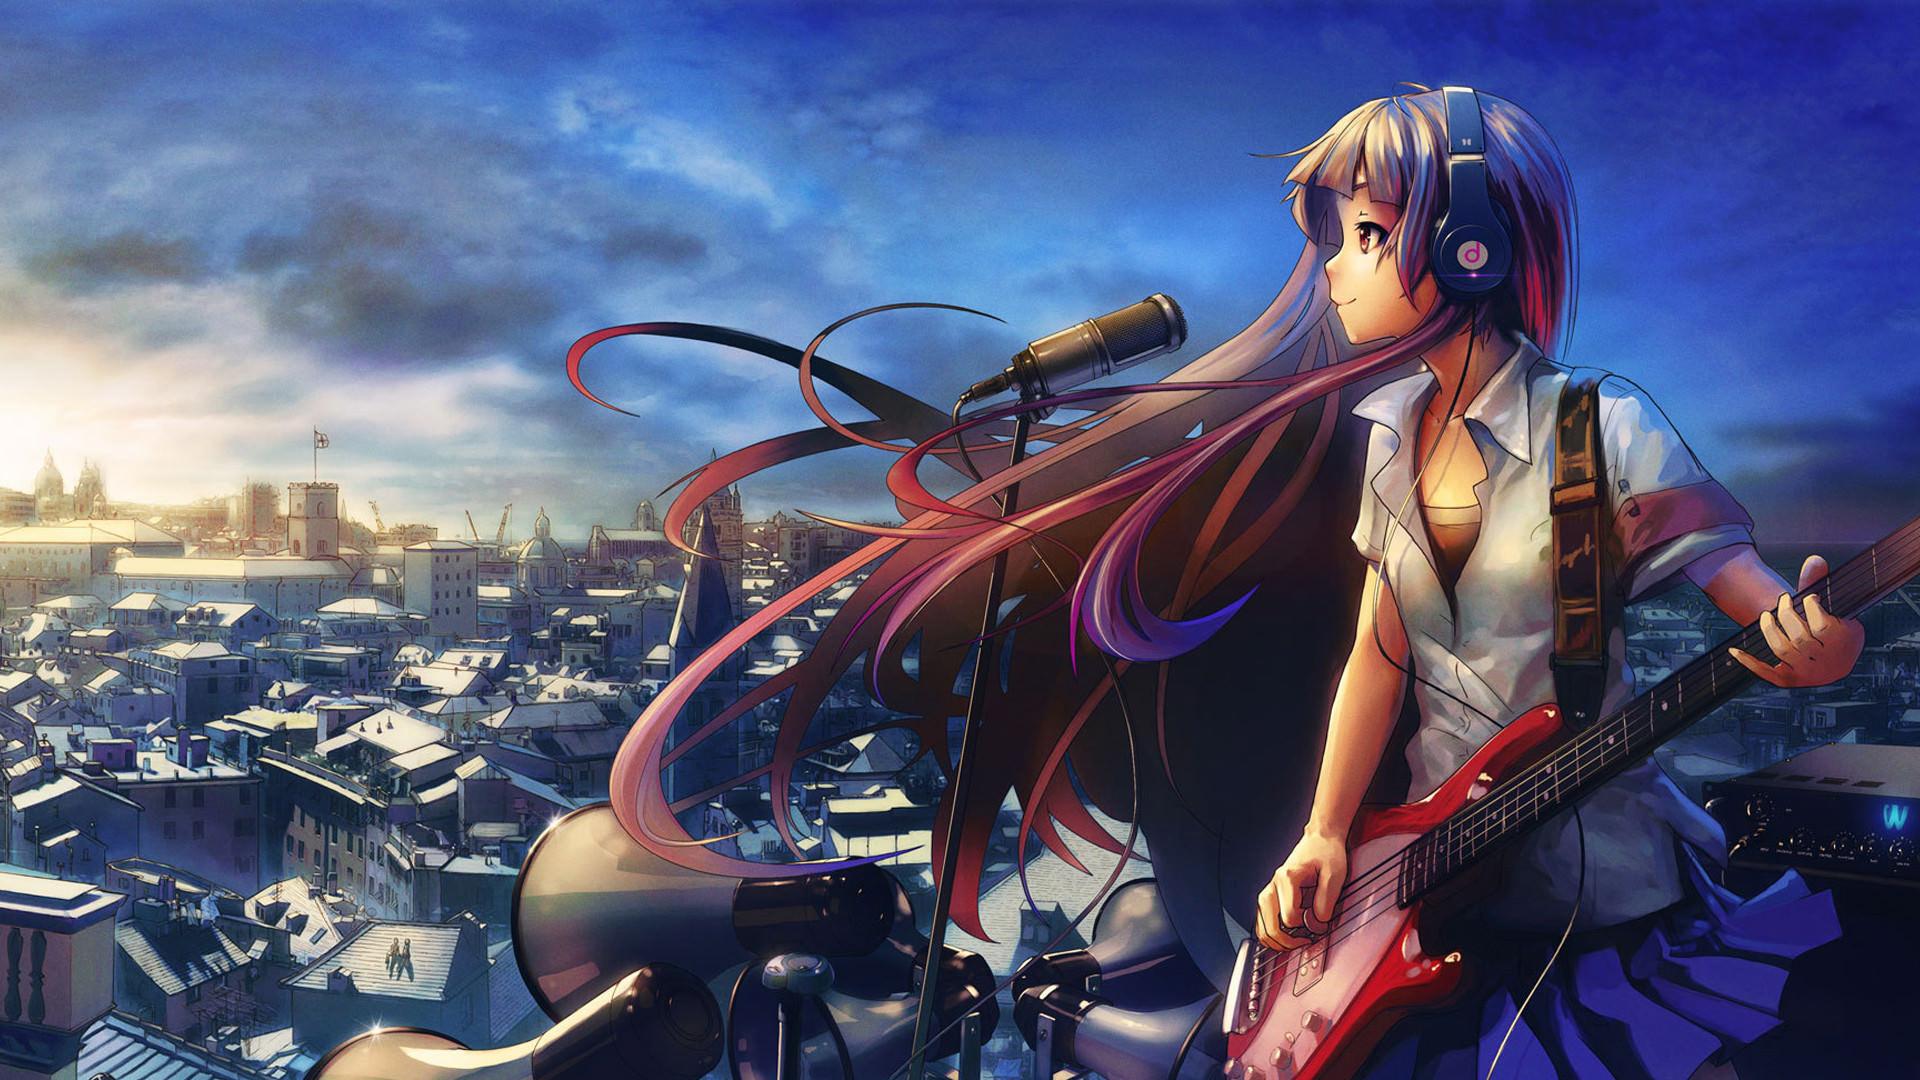 anime girl with guitar full HD wallpaper download 1080p